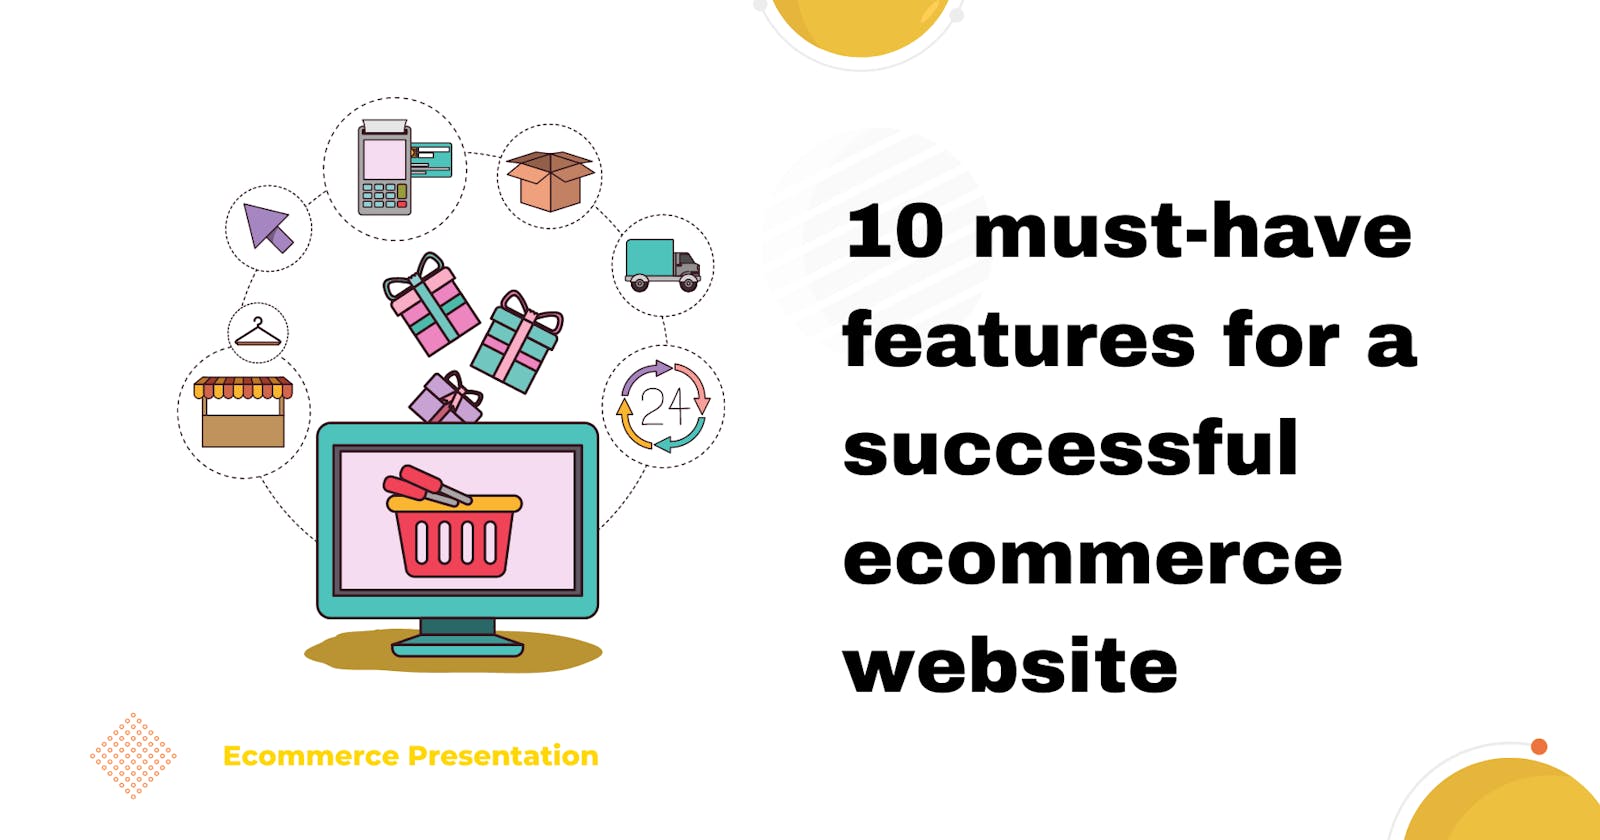 10 must-have features for a successful ecommerce website